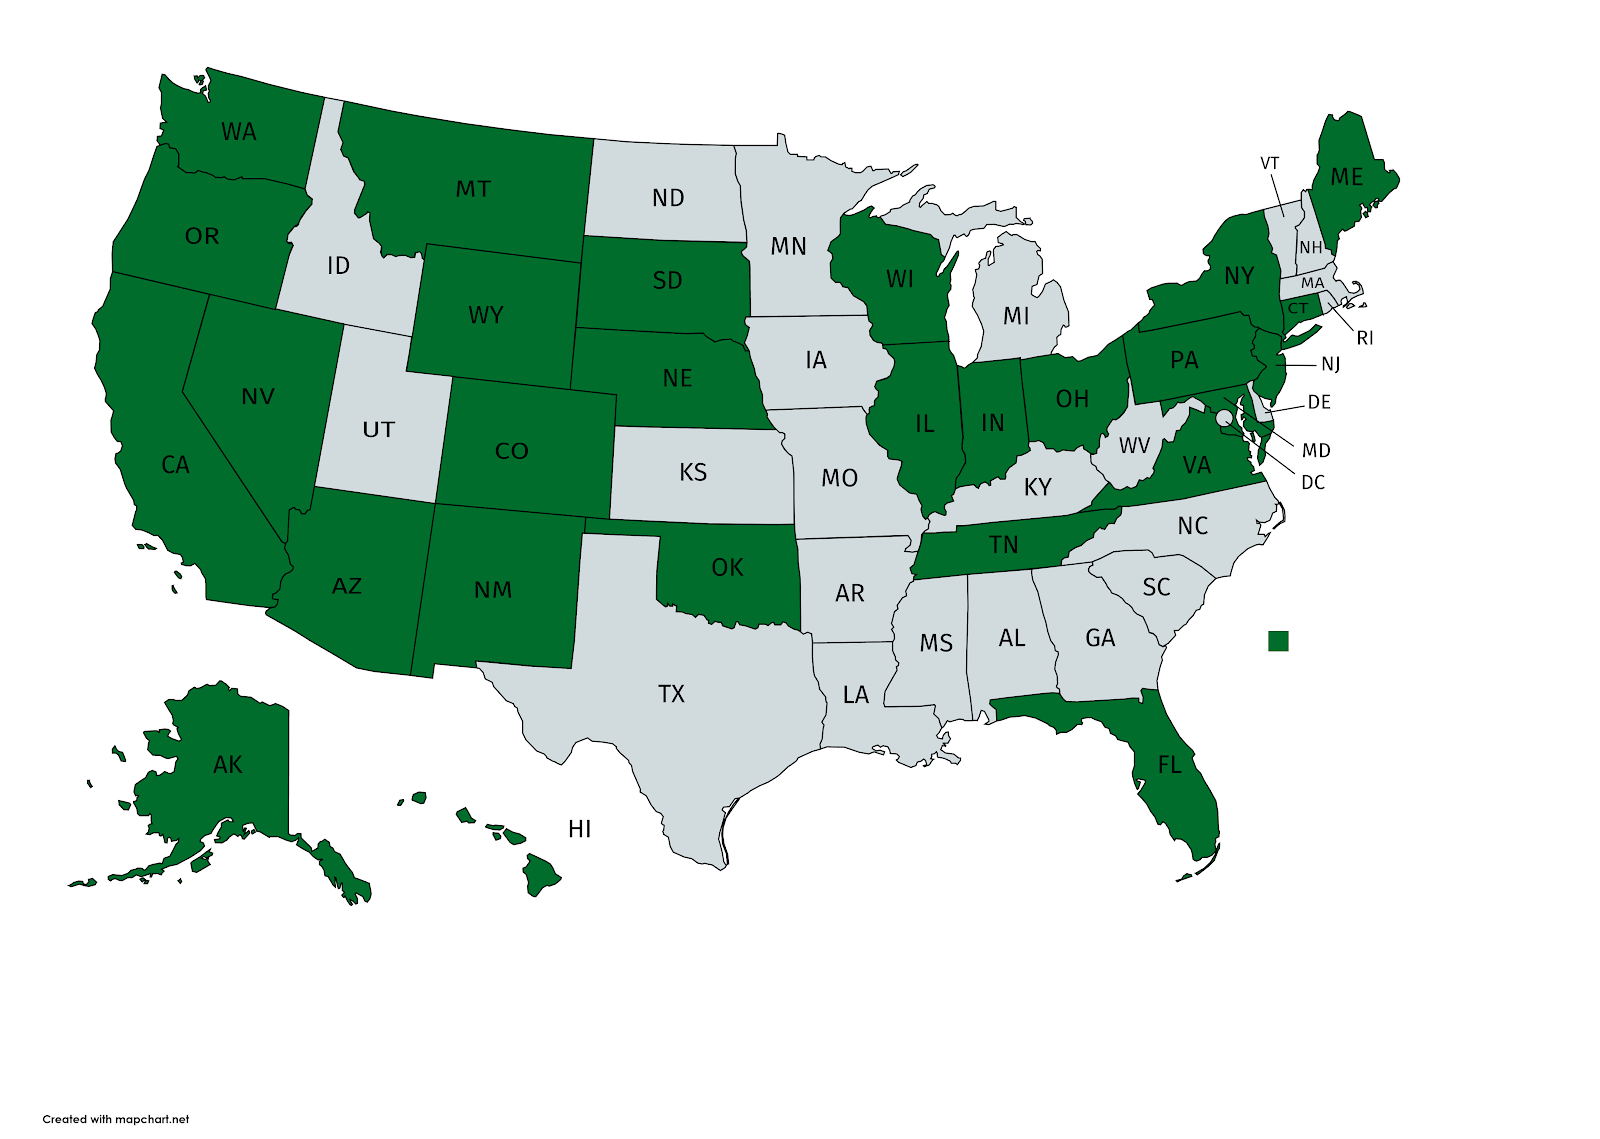 27 States make committee votes public on the website